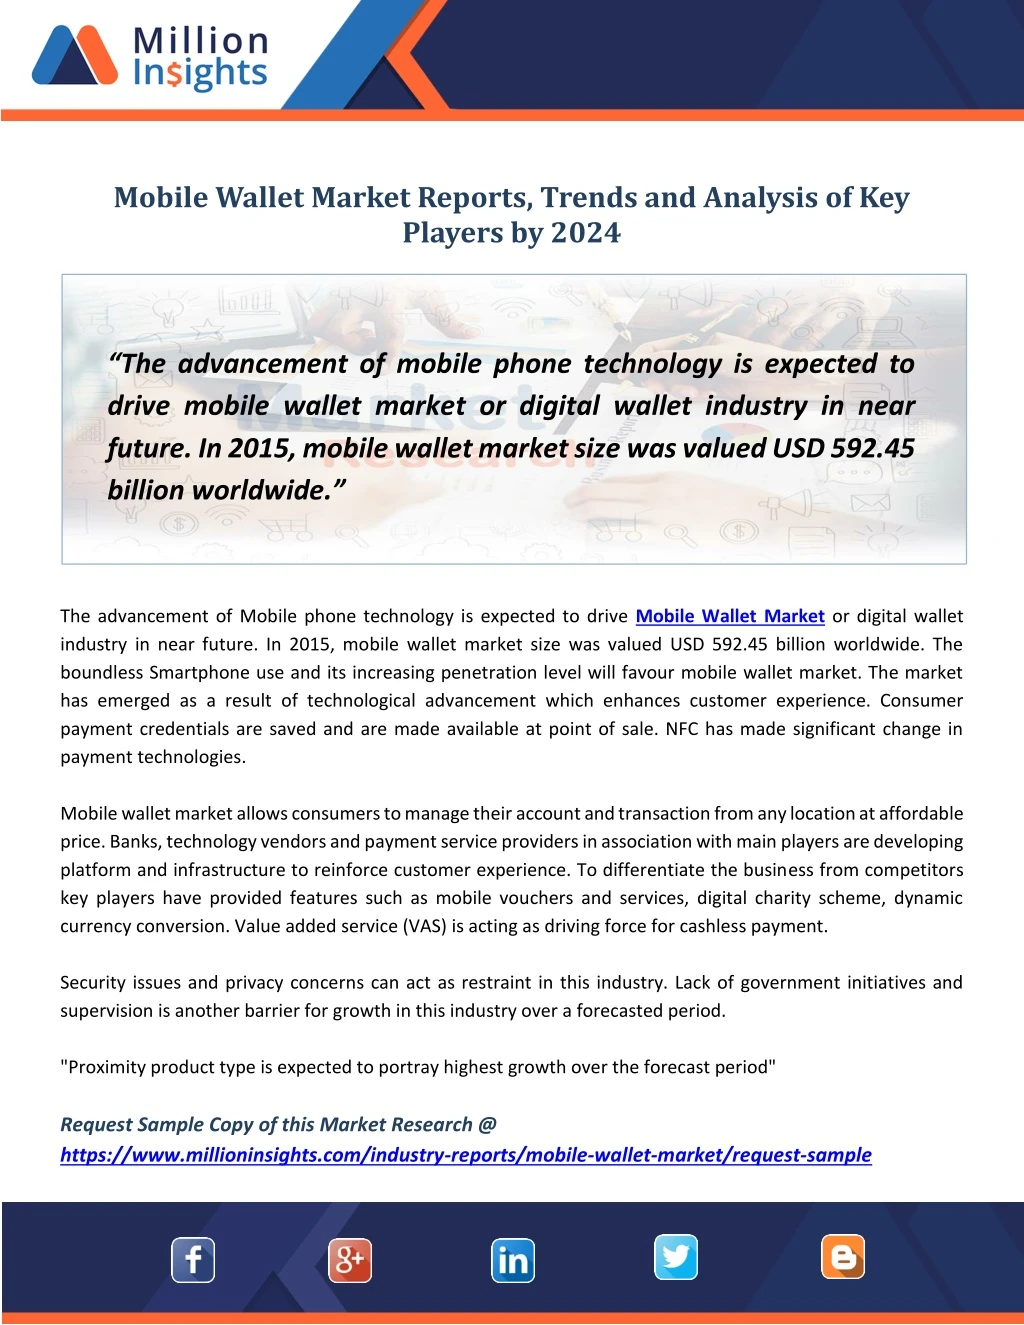 mobile wallet market reports trends and analysis